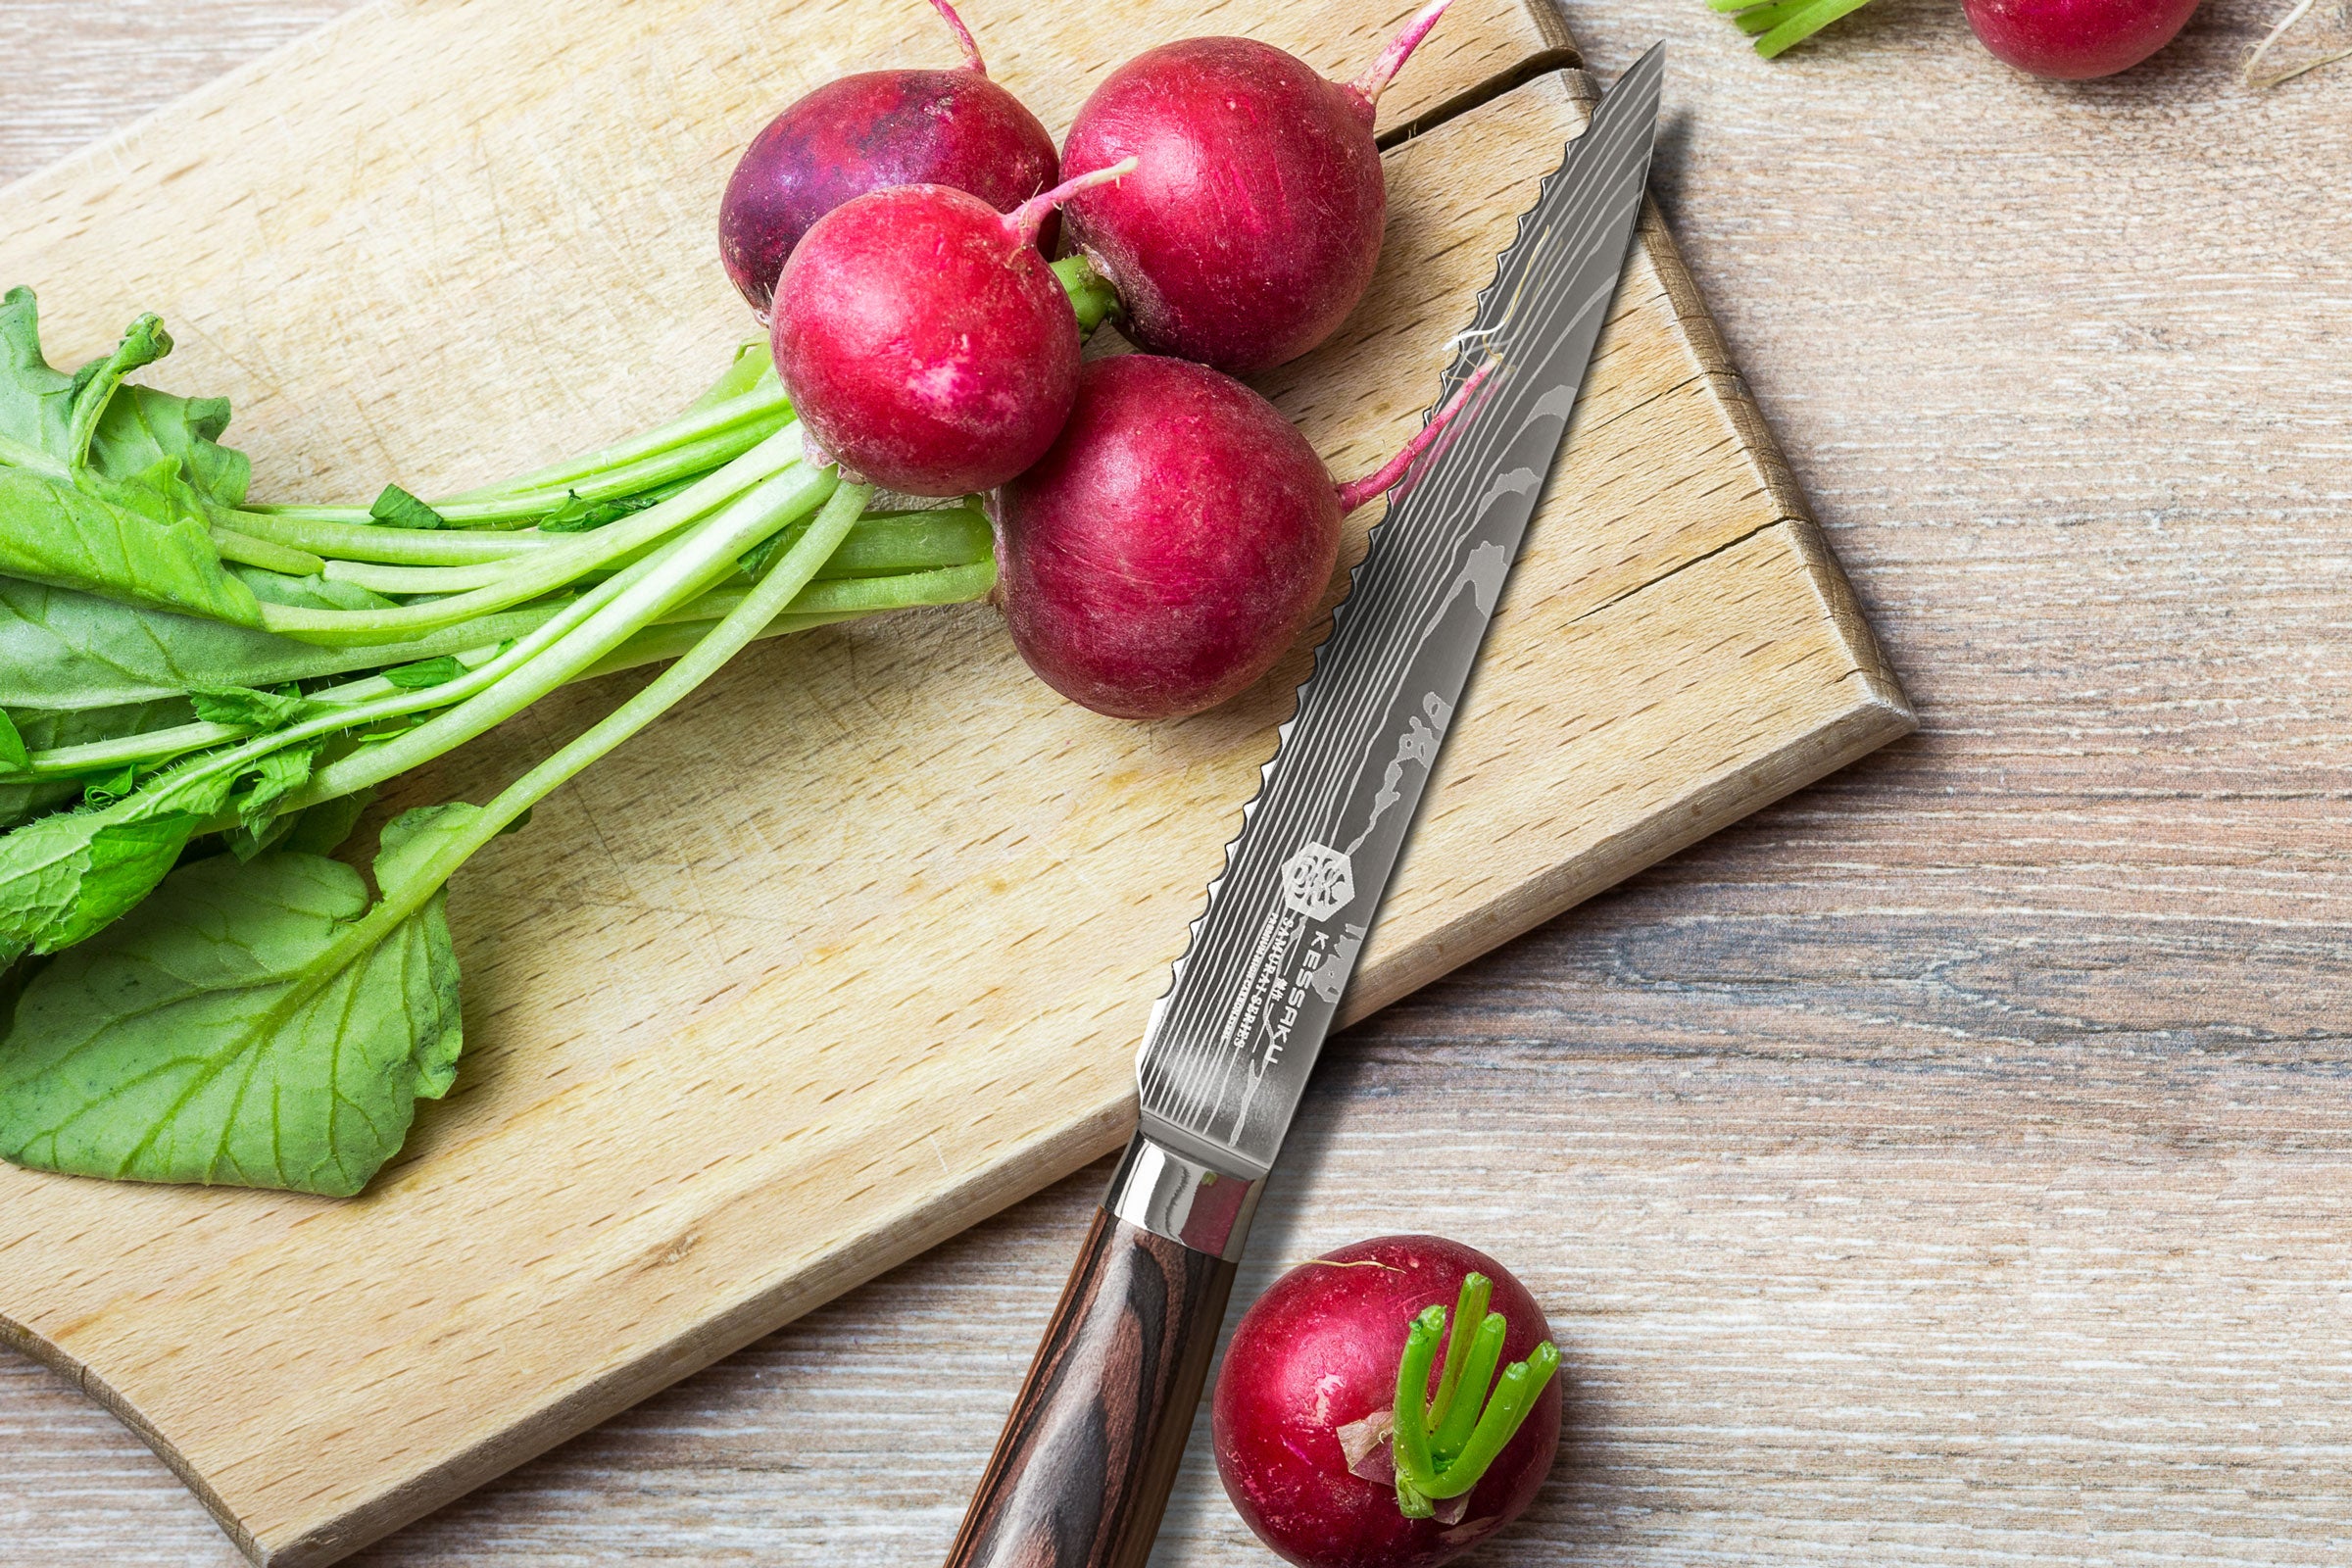 The Samurai Serrated Utility Knife on a cutting board with radishes.